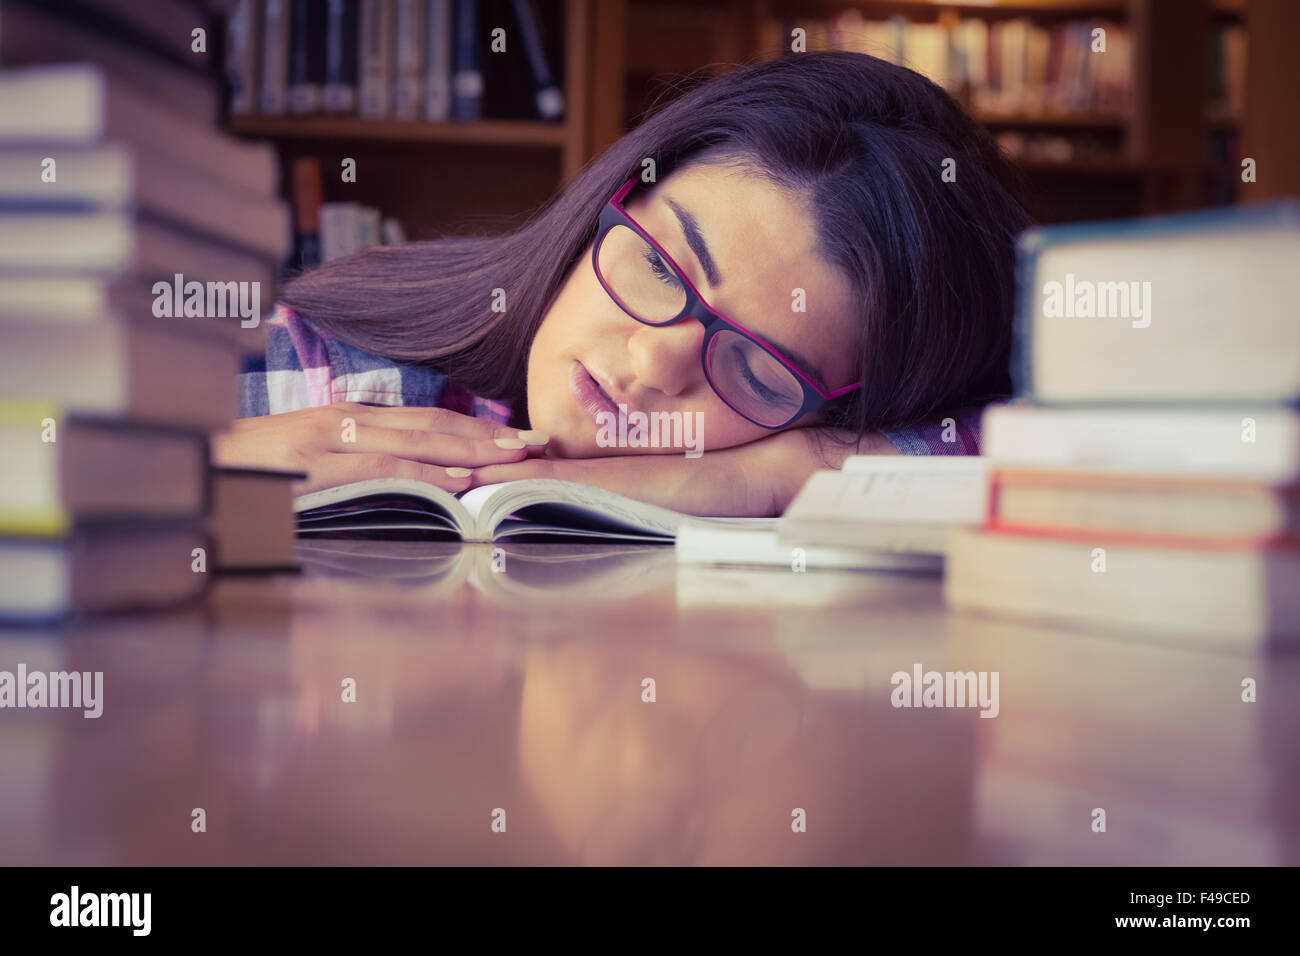 Female student sleeping with head on book Stock Photo